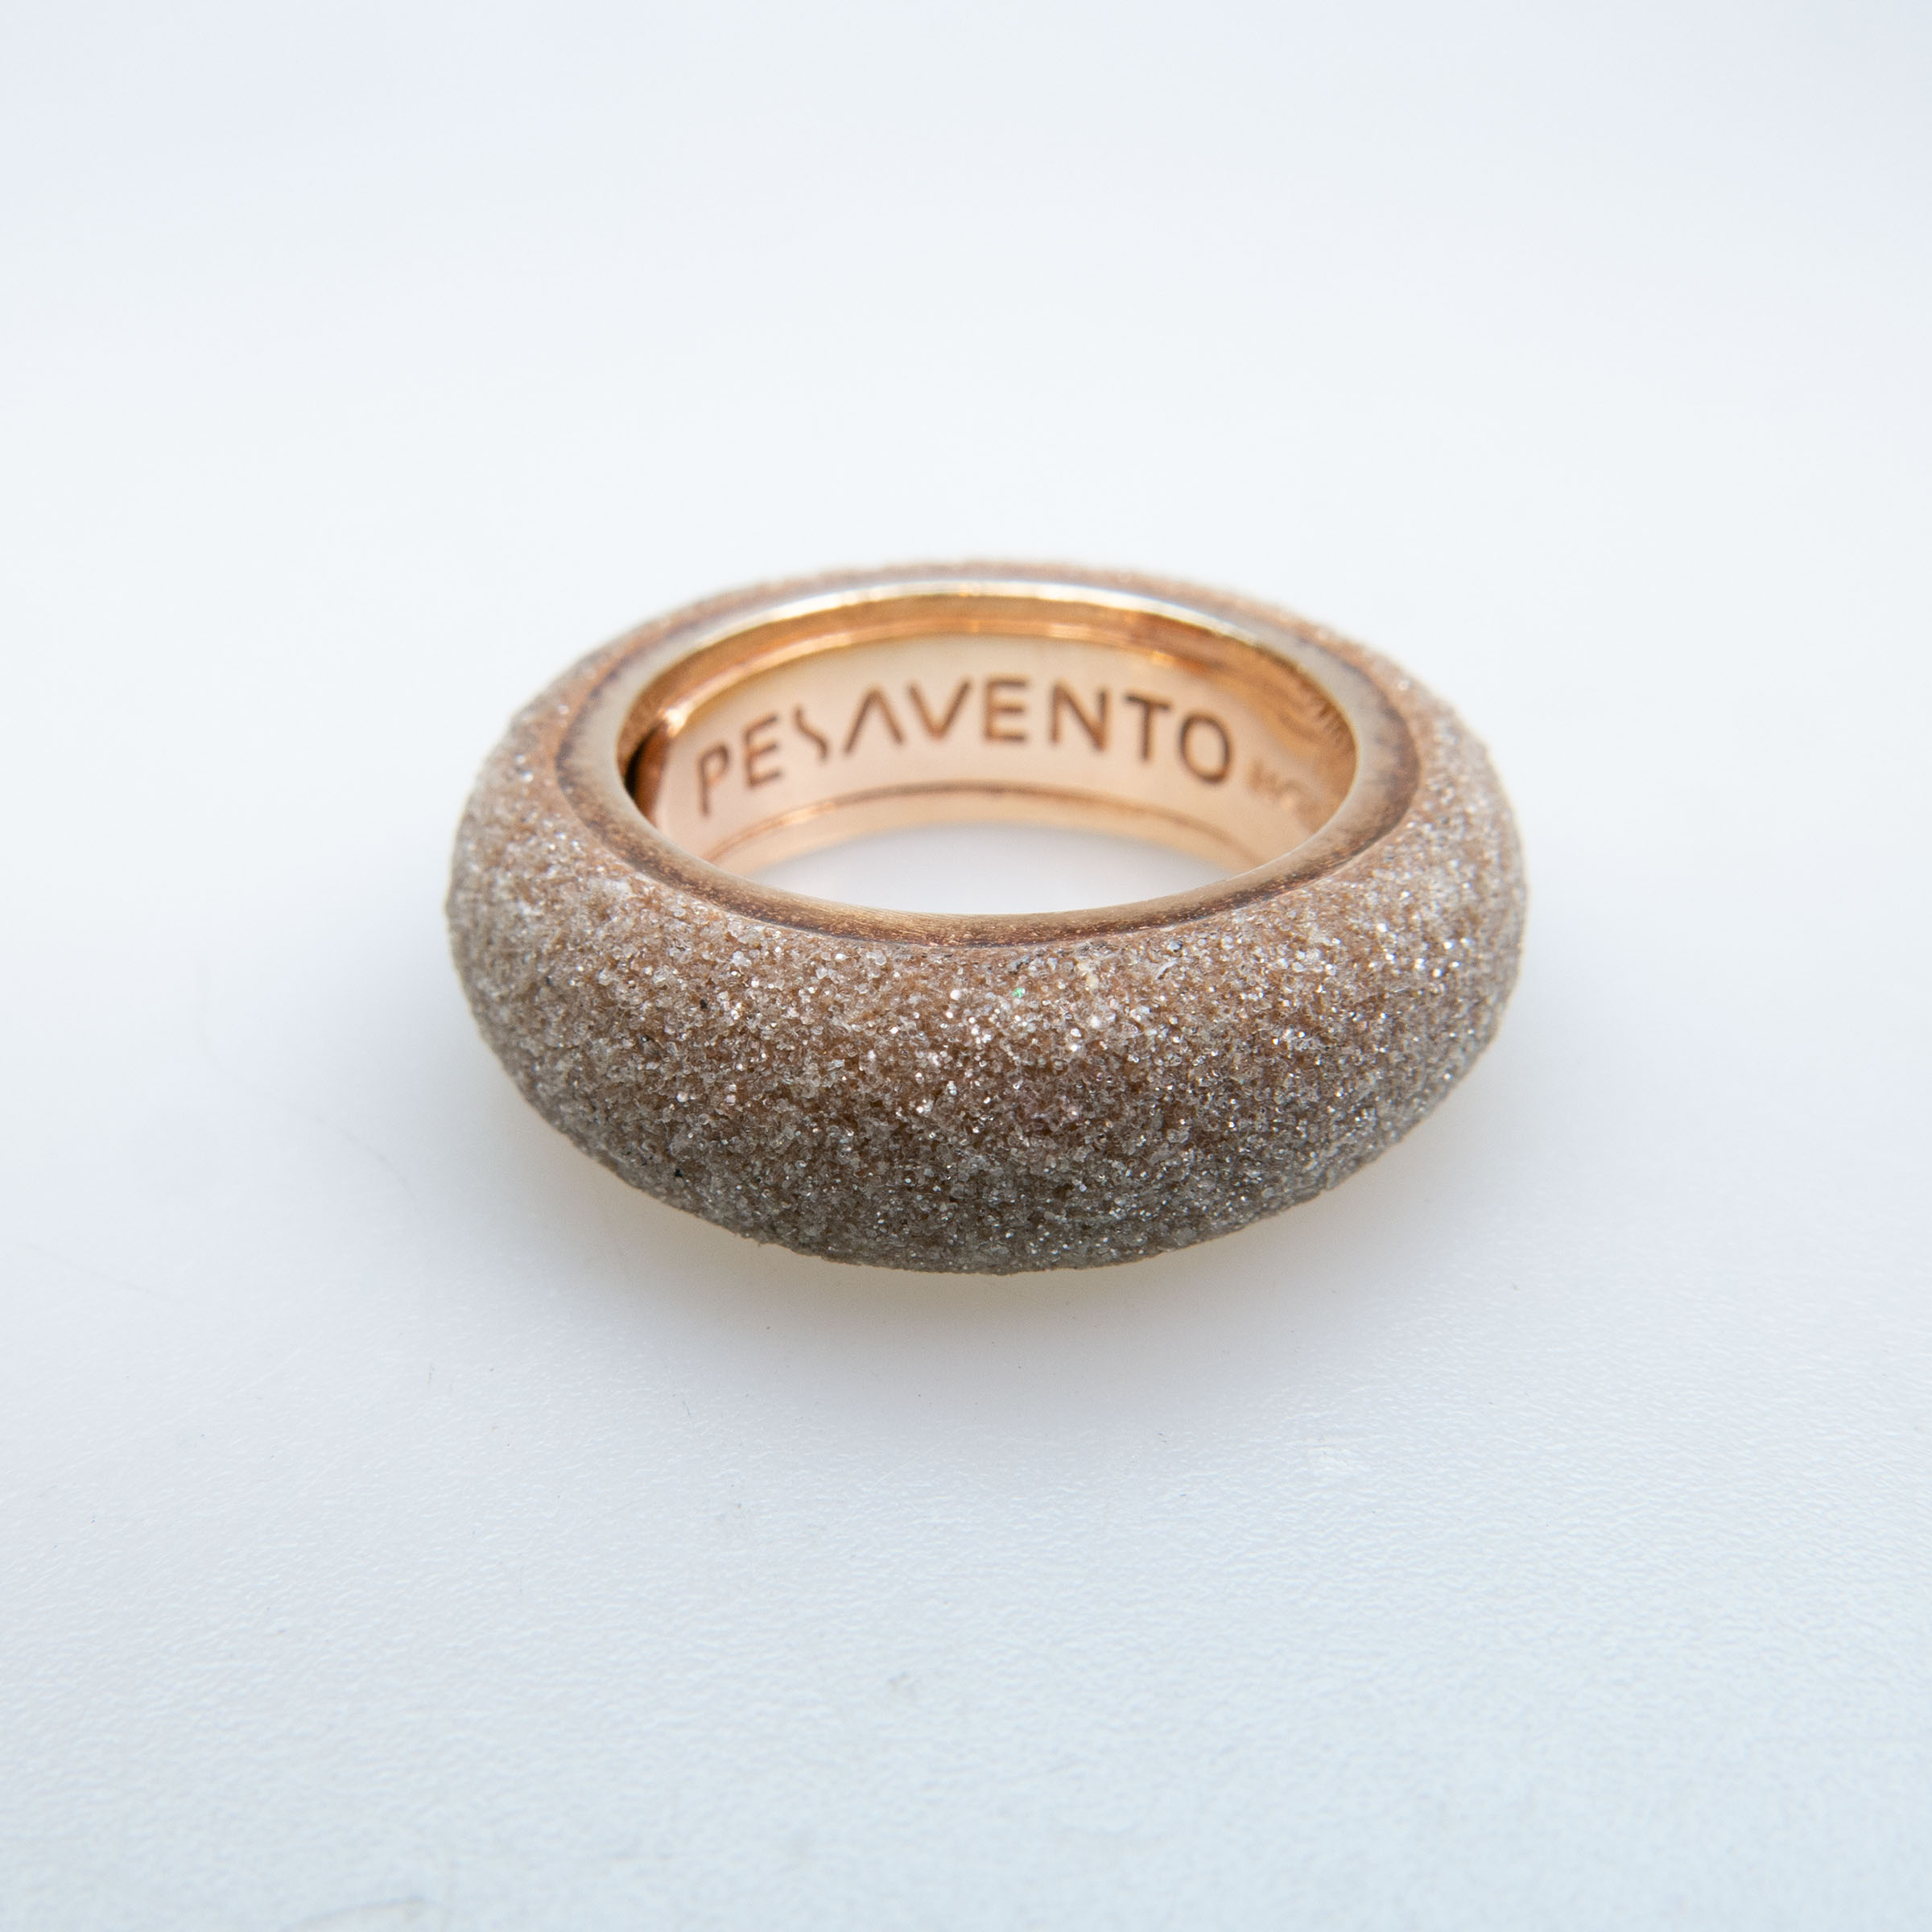 Pesavento Italian Rose Gold Plated Sterling Silver Band